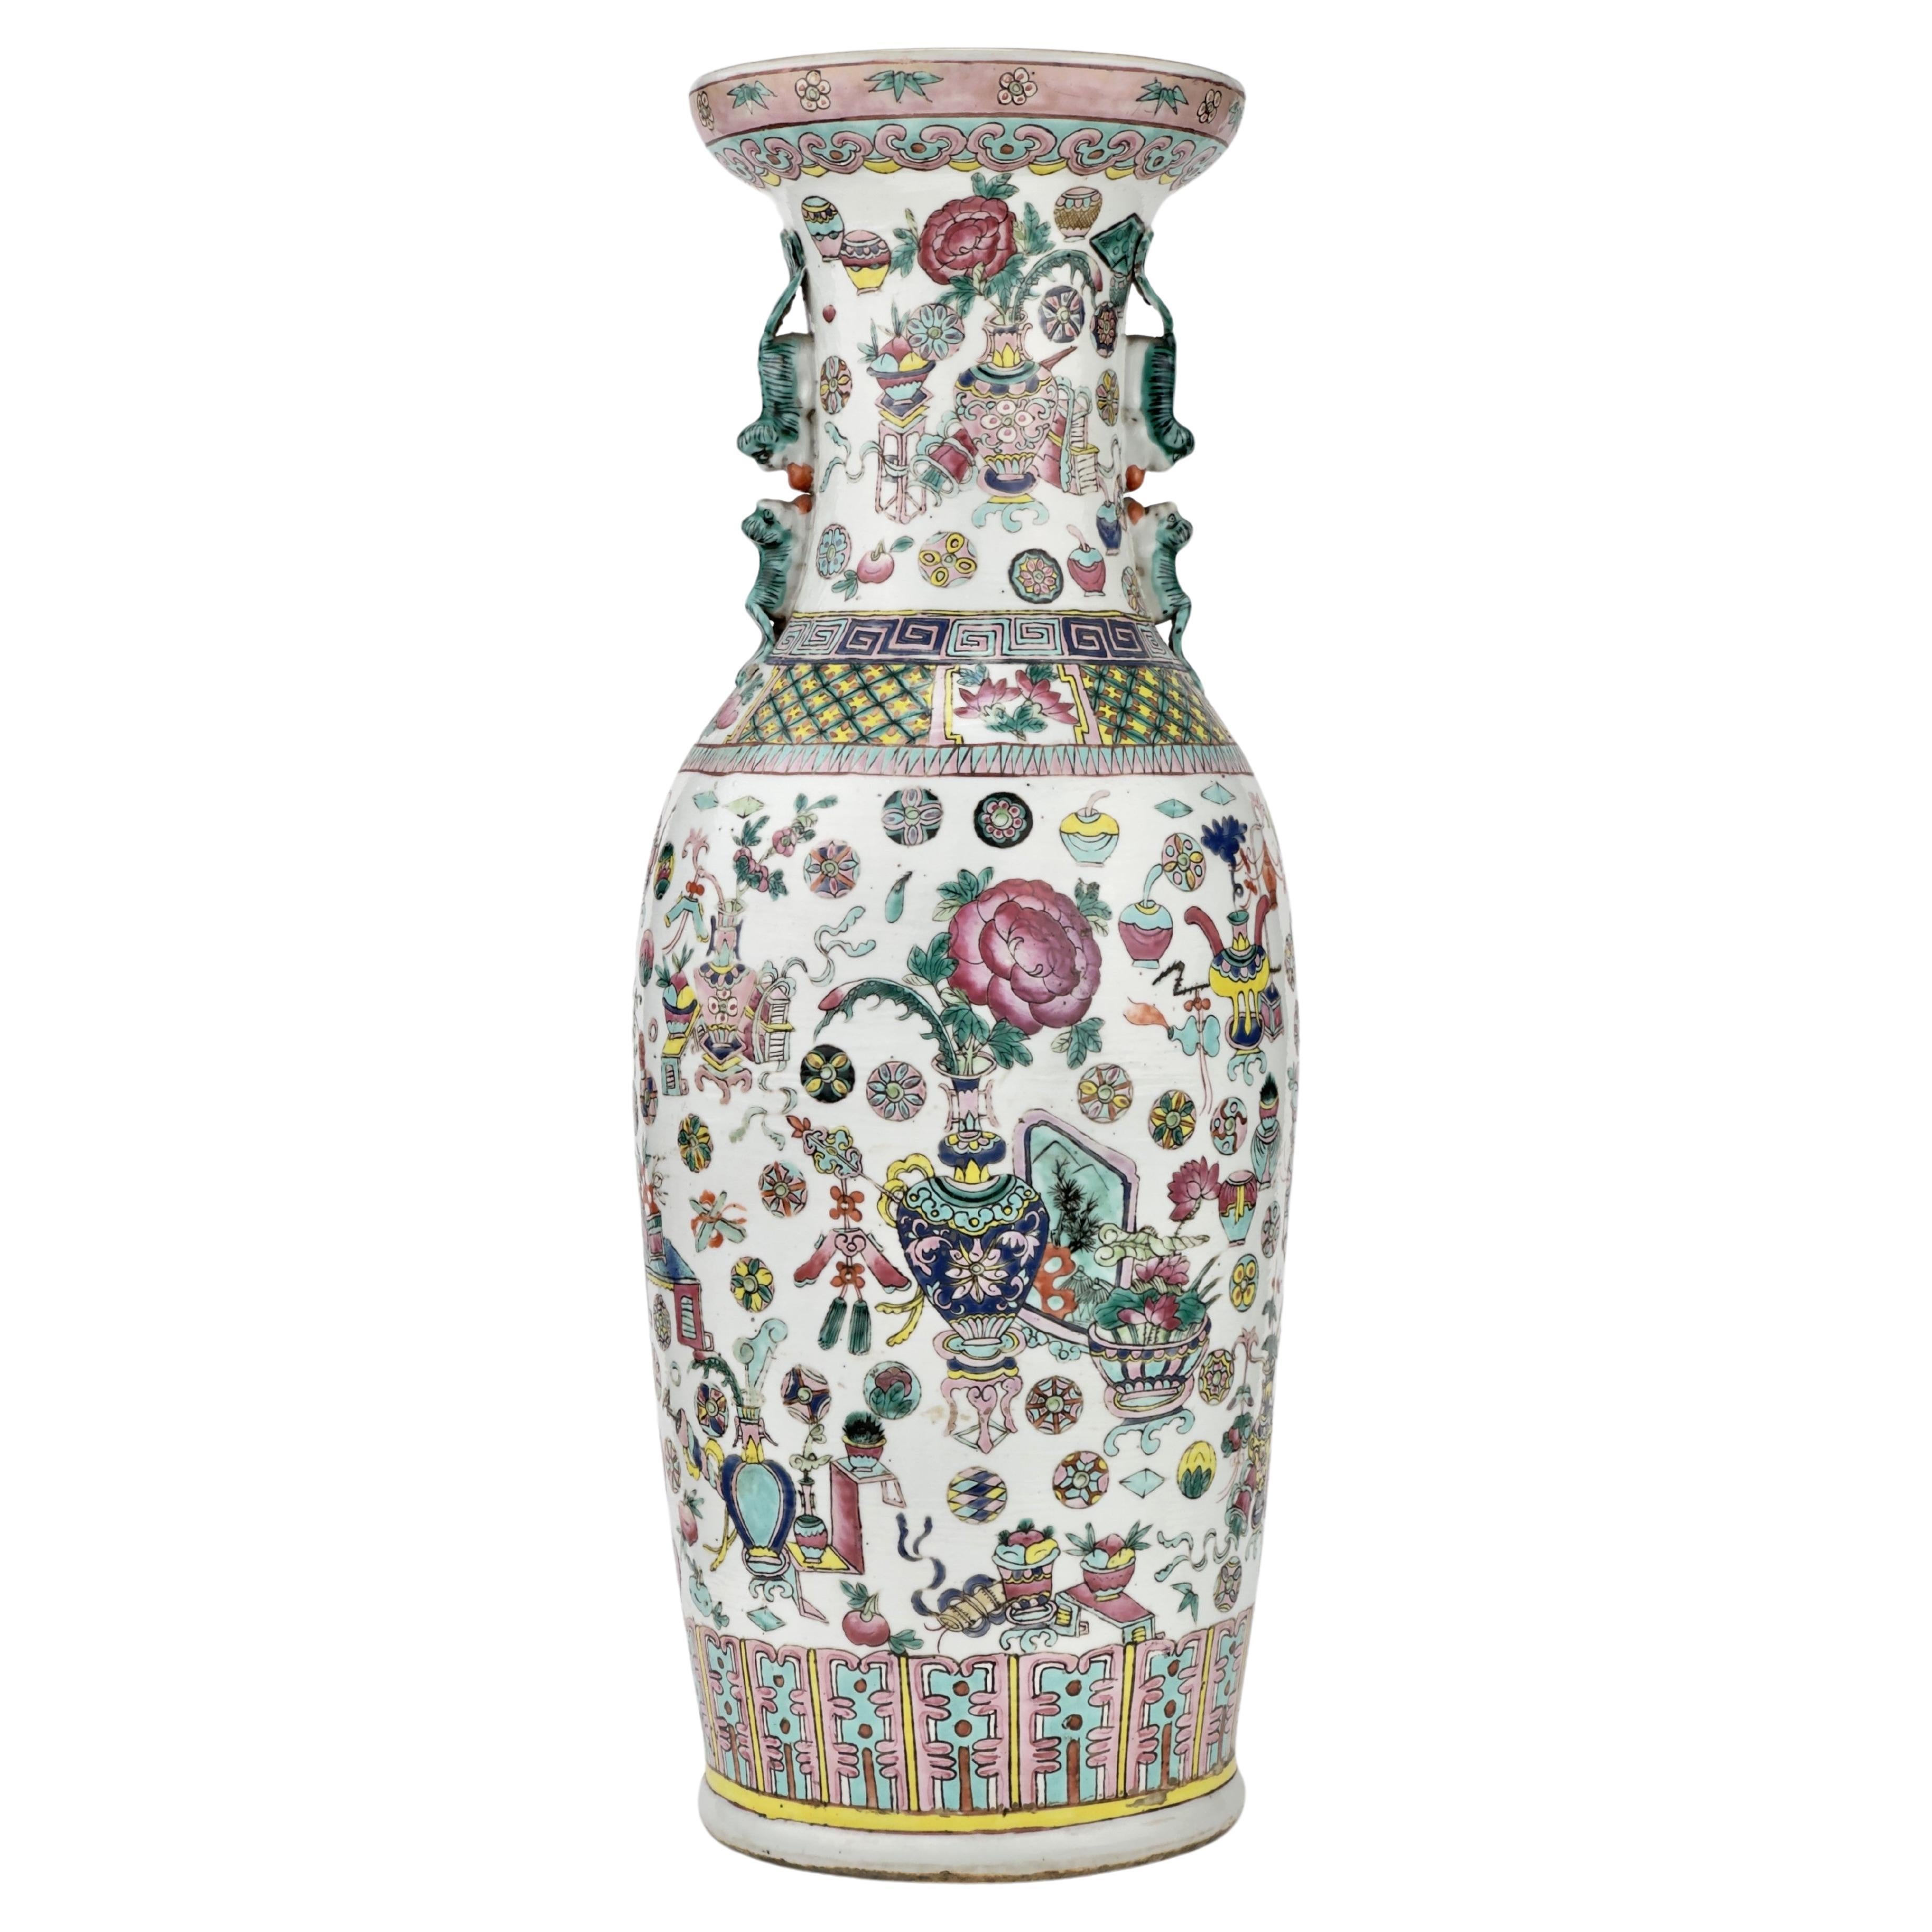 A Large Chinese Enameled Famille Rose Vase, Qing Period, 19th century For Sale